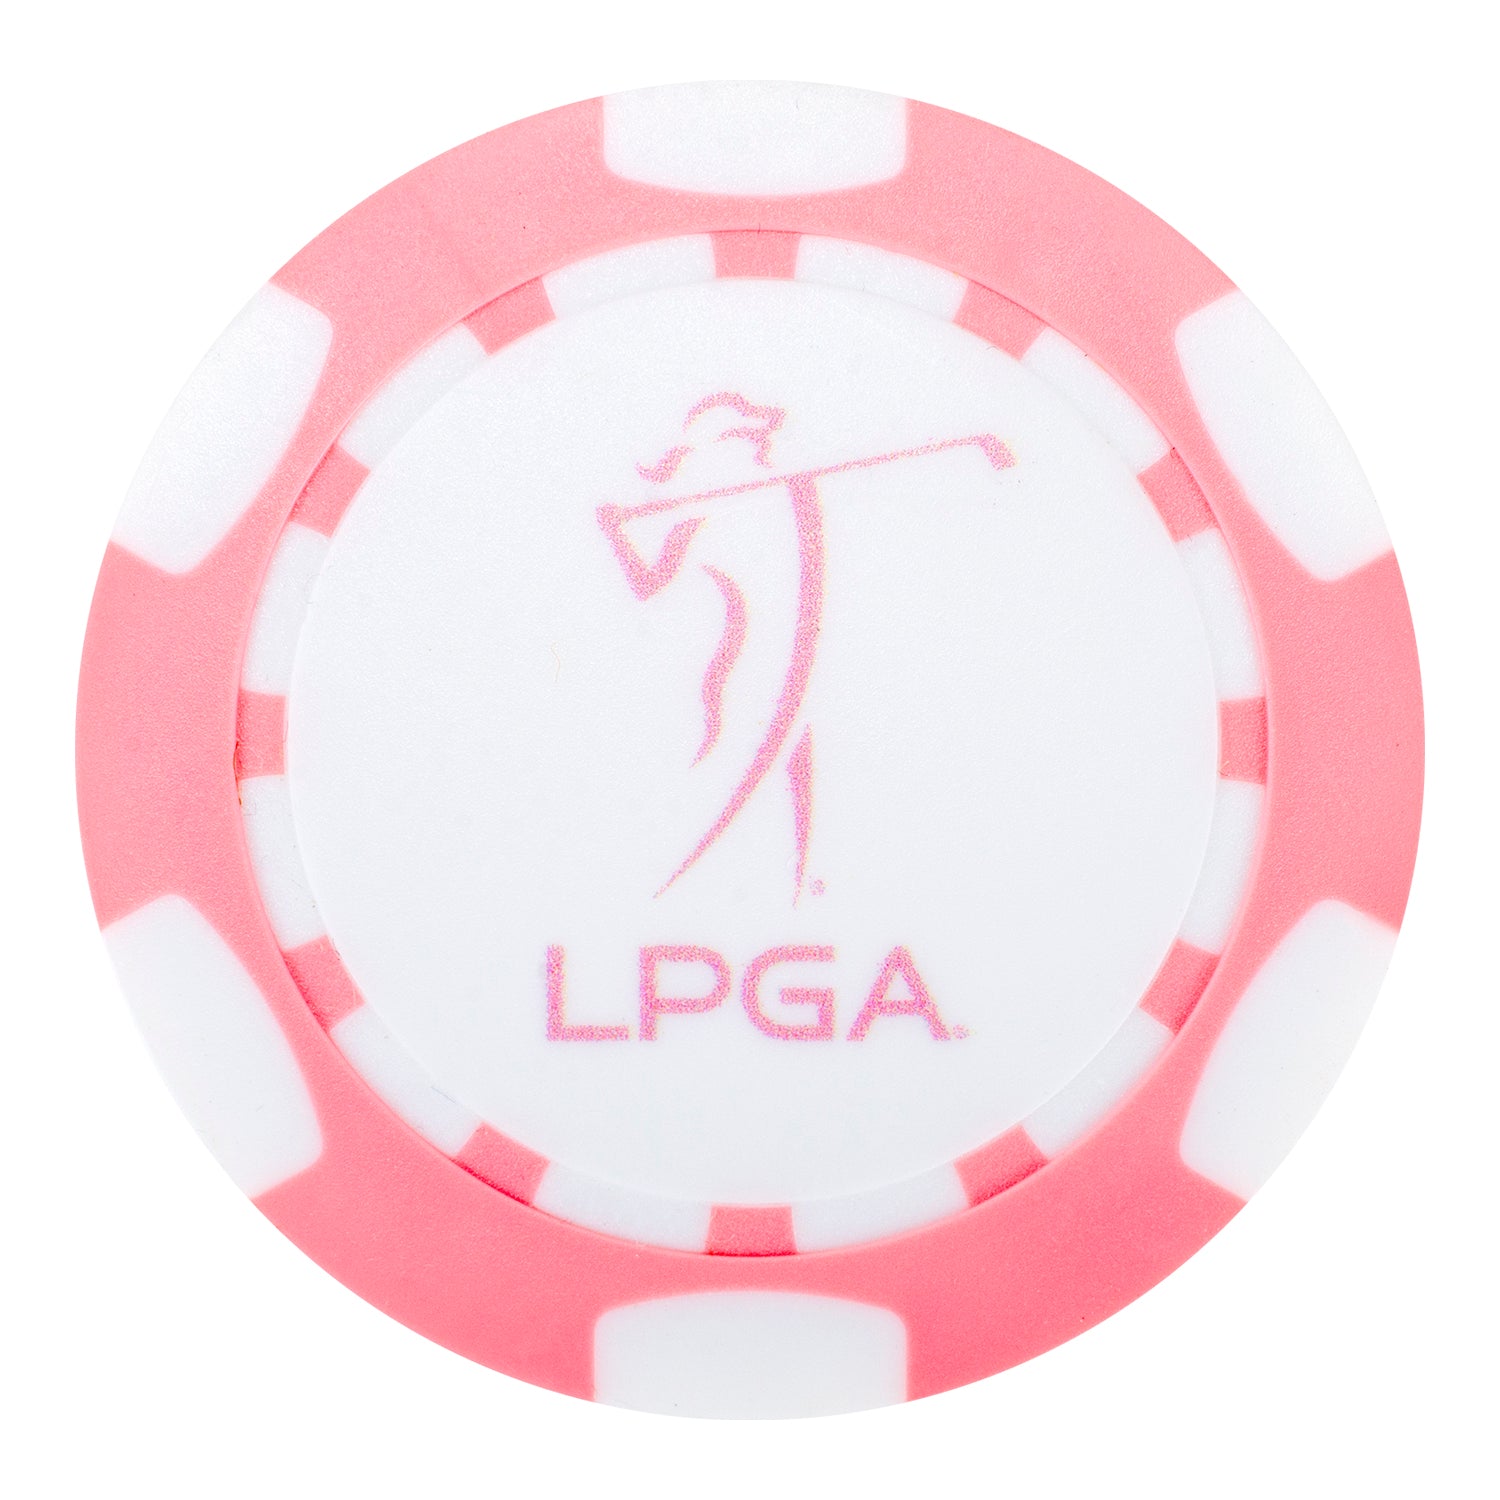 Ahead LPGA Poker Chip in Pink - Front View